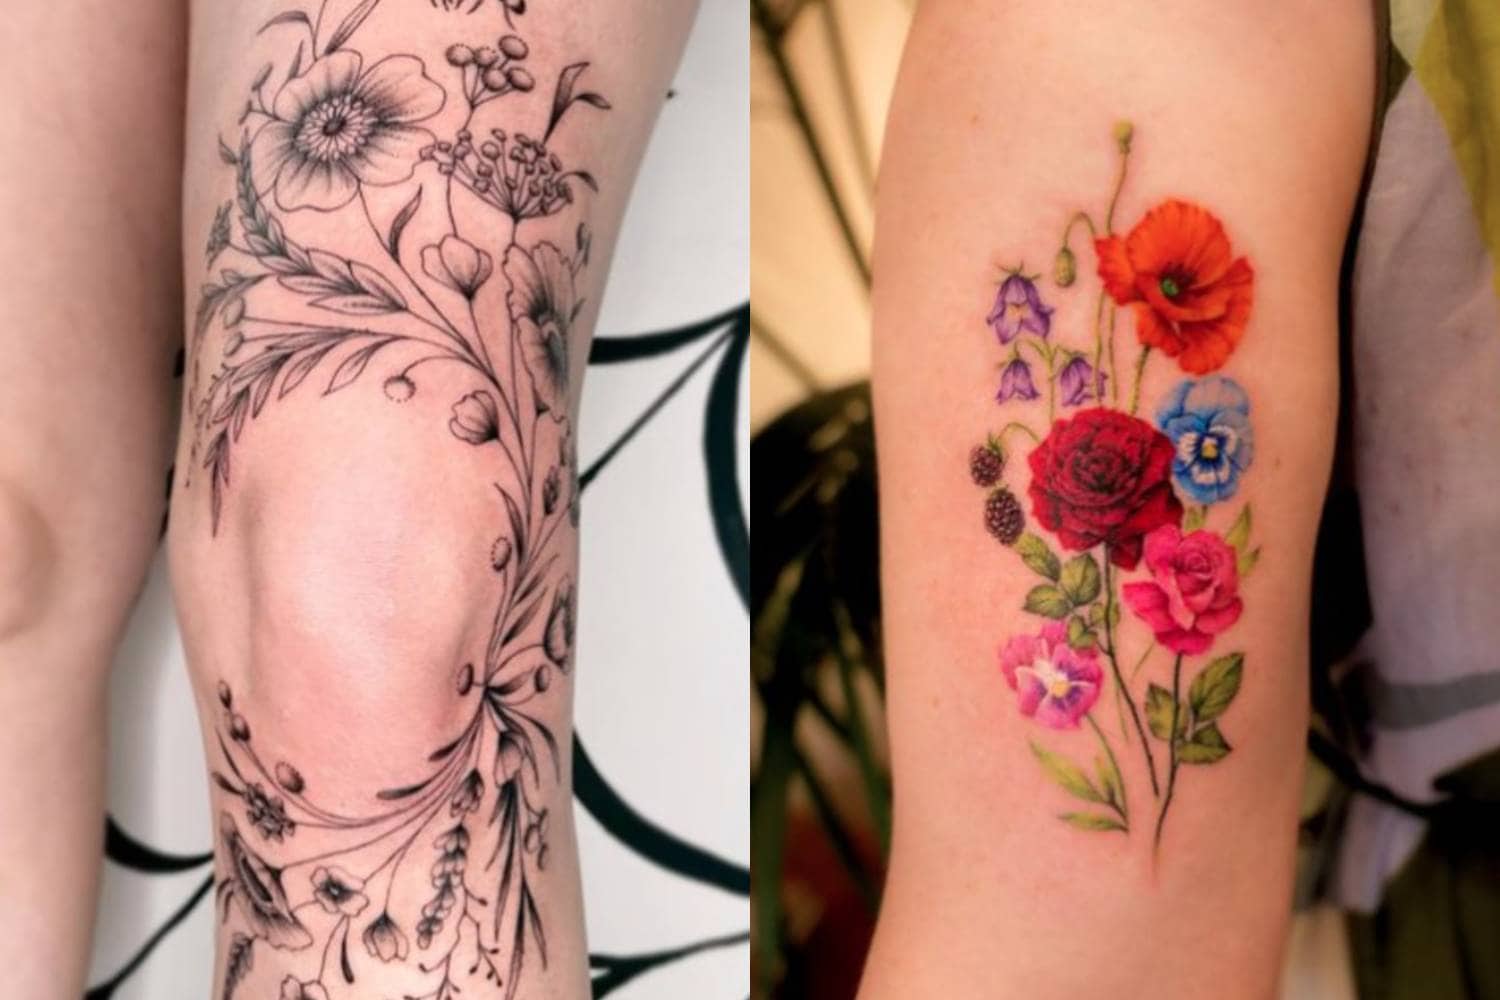 Ink positive how tattoos can heal the mind as well as adorn the body   Psychology  The Guardian